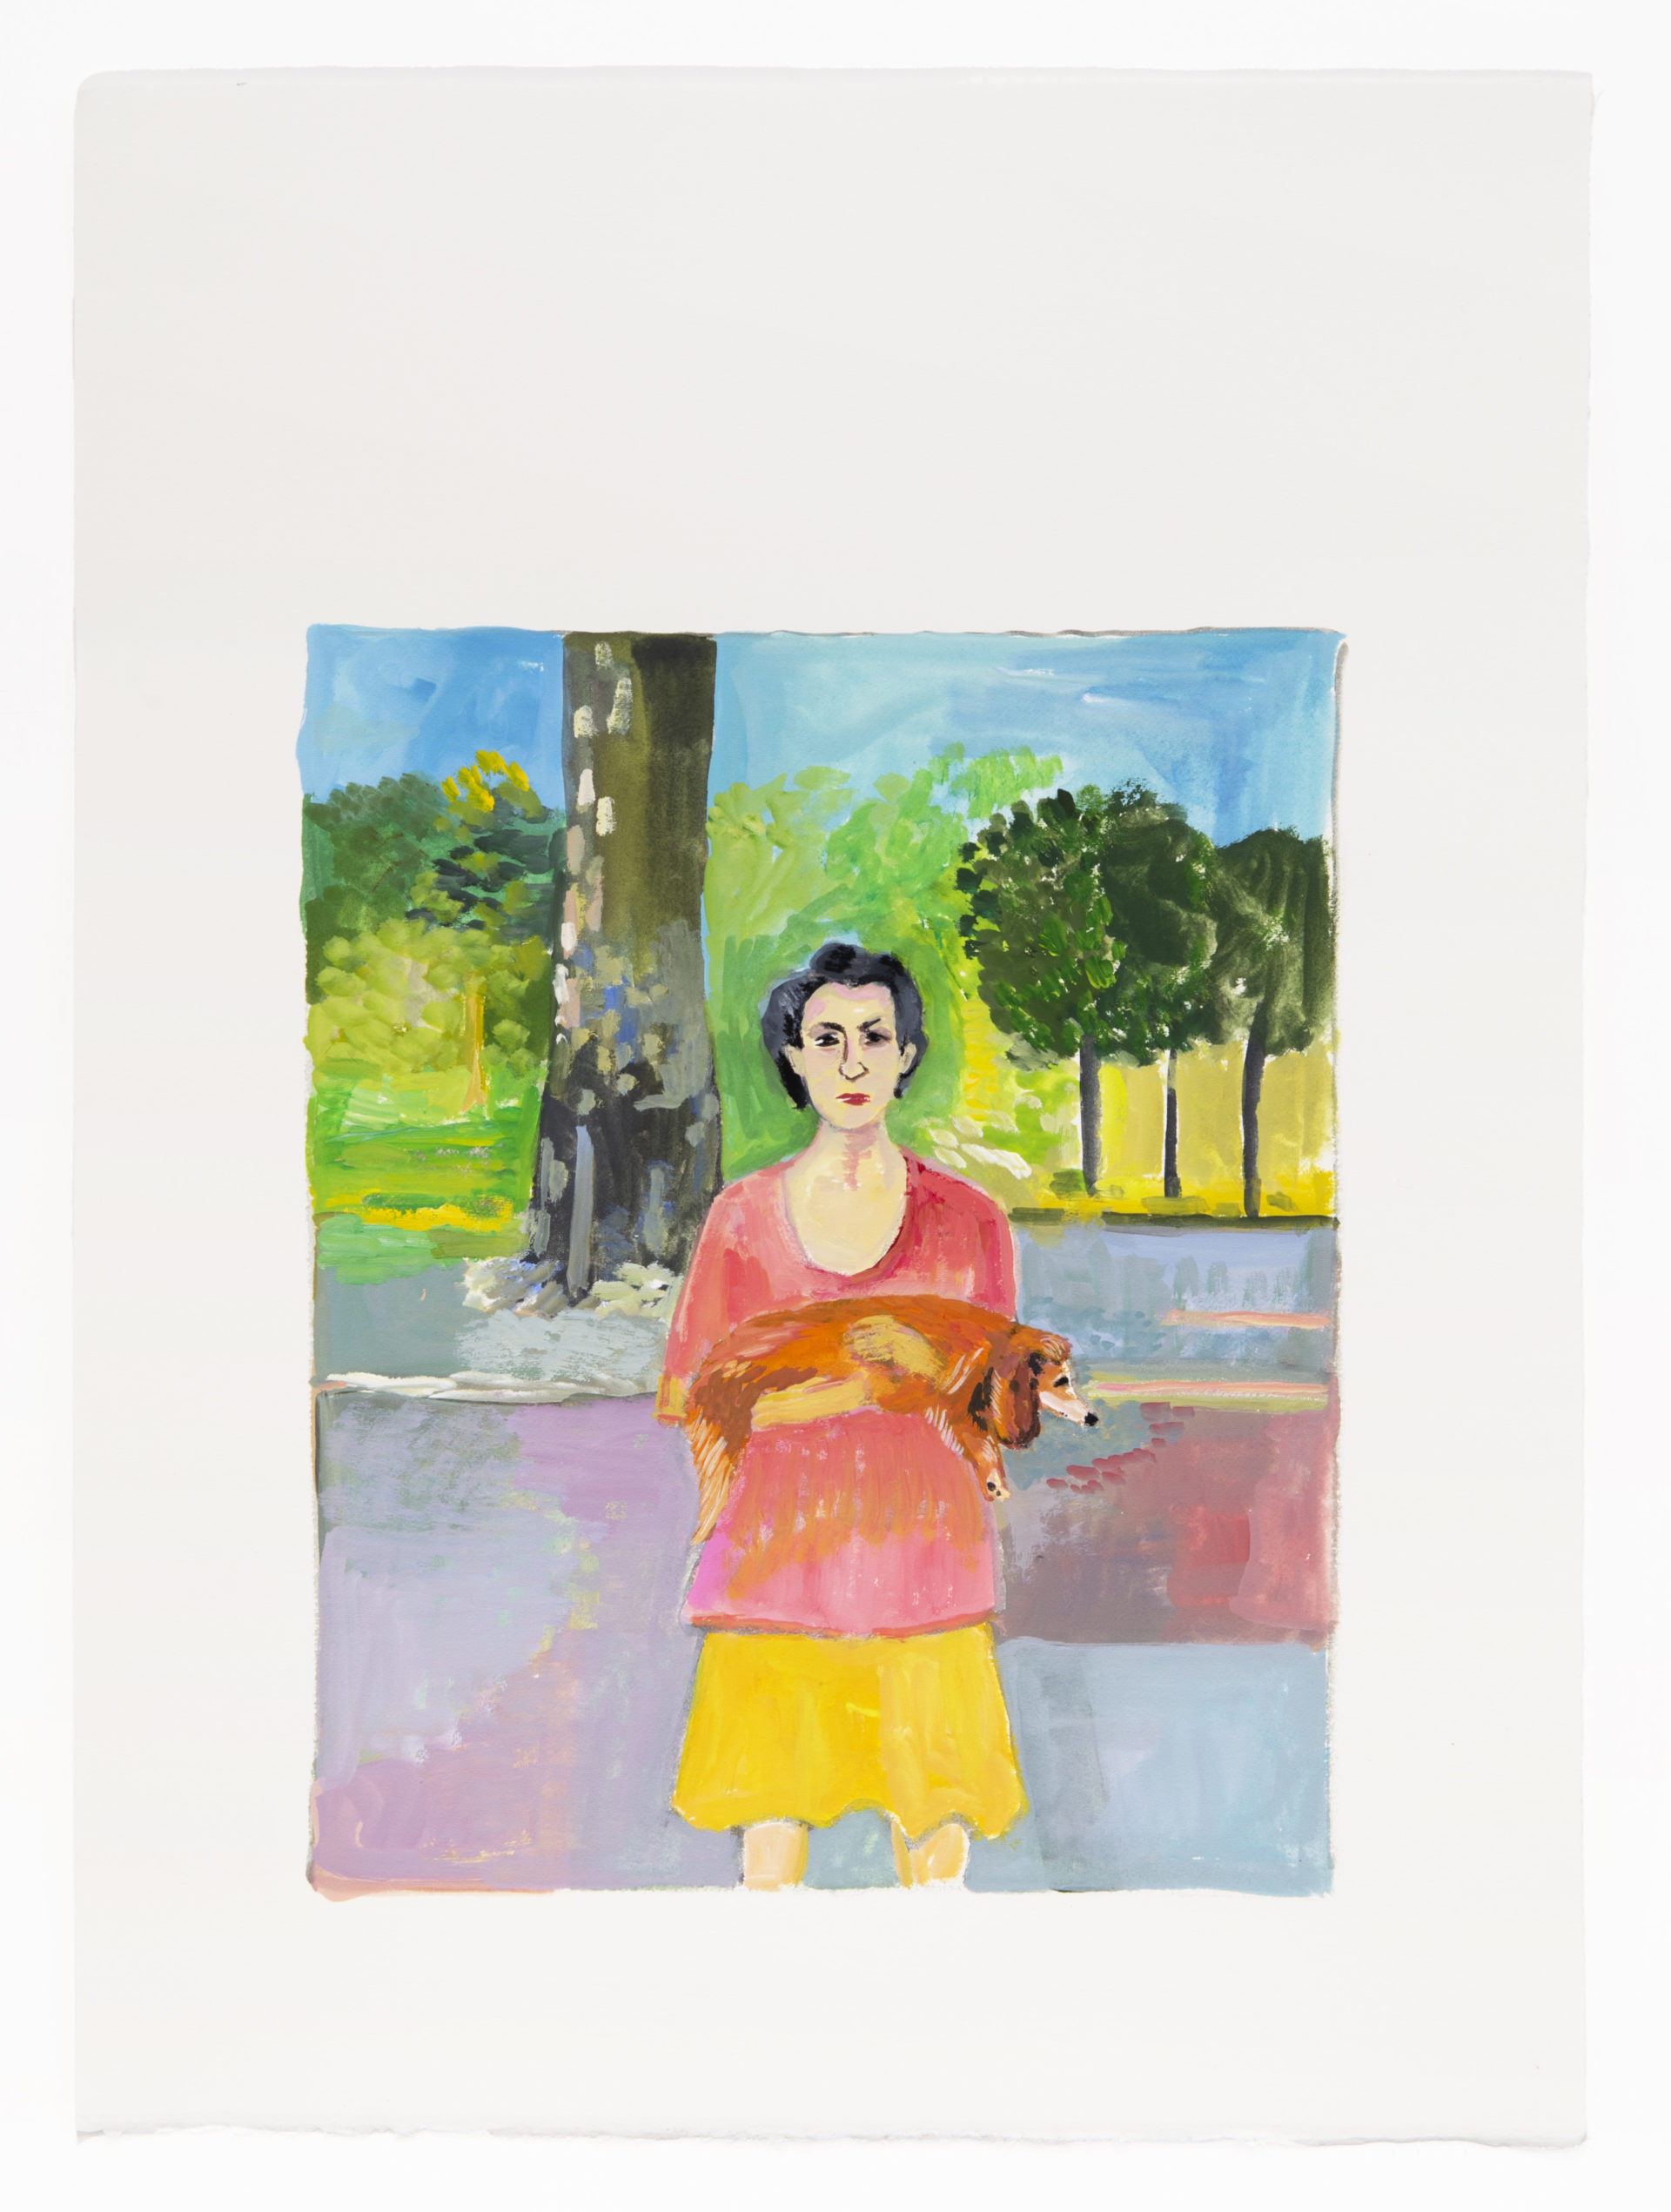 Maira Kalman Woman Carrying Ill Dog, 2022 Gouache Image Dimensions: 9 1/2 x 7 1/2 inches (24.1 x 19.1 cm) Paper Dimensions: 15 1/4 x 11 inches (38.7 x 27.9 cm)